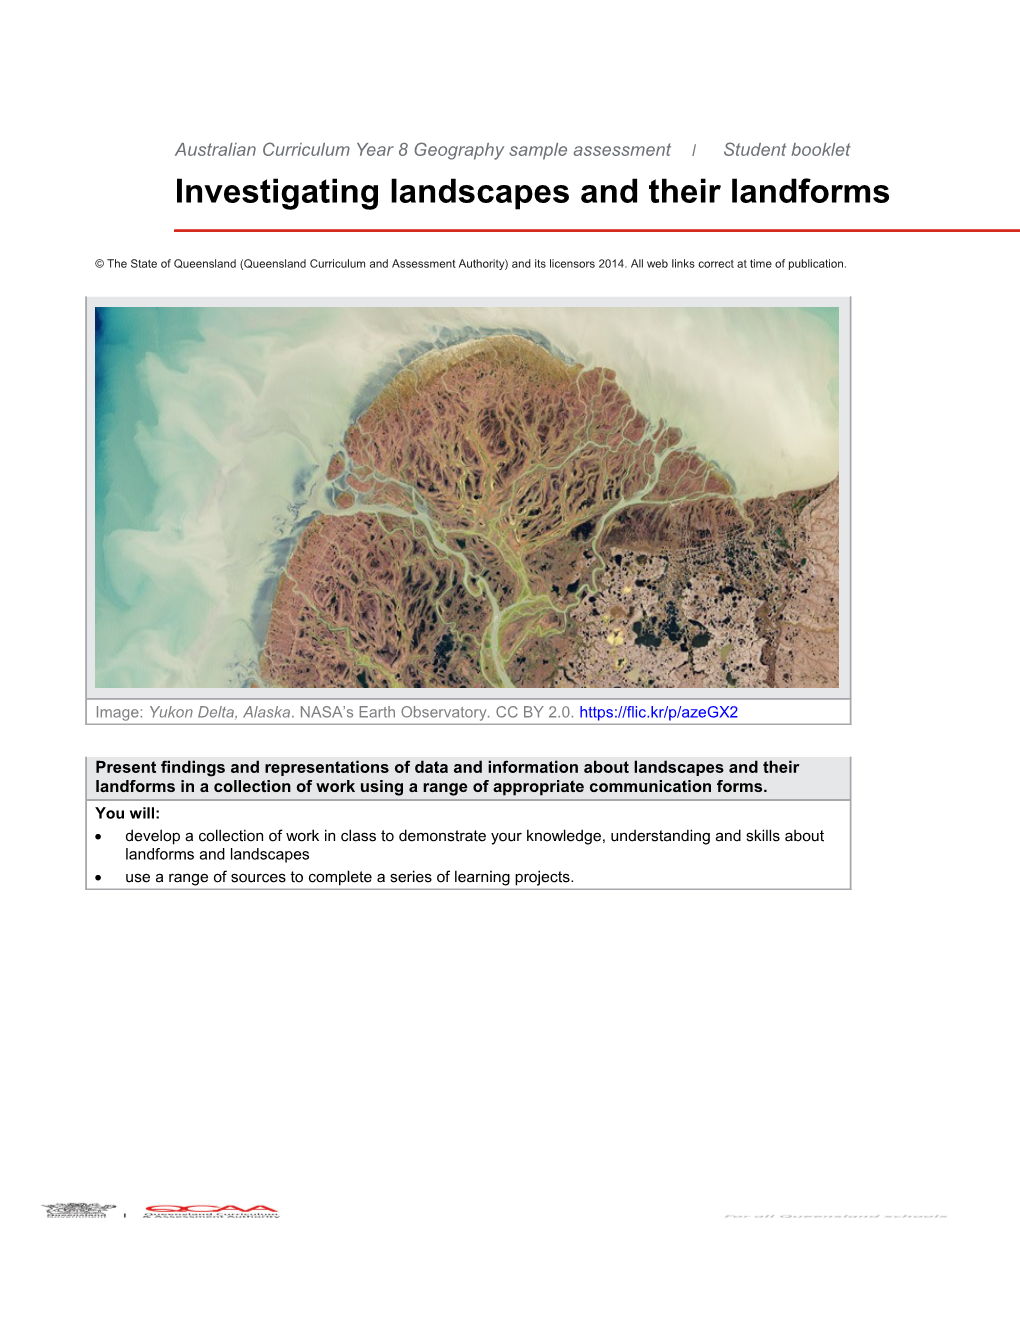 Year 8 Geography Sample Assessment Student Booklet Investigating Landscapes and Their Landforms